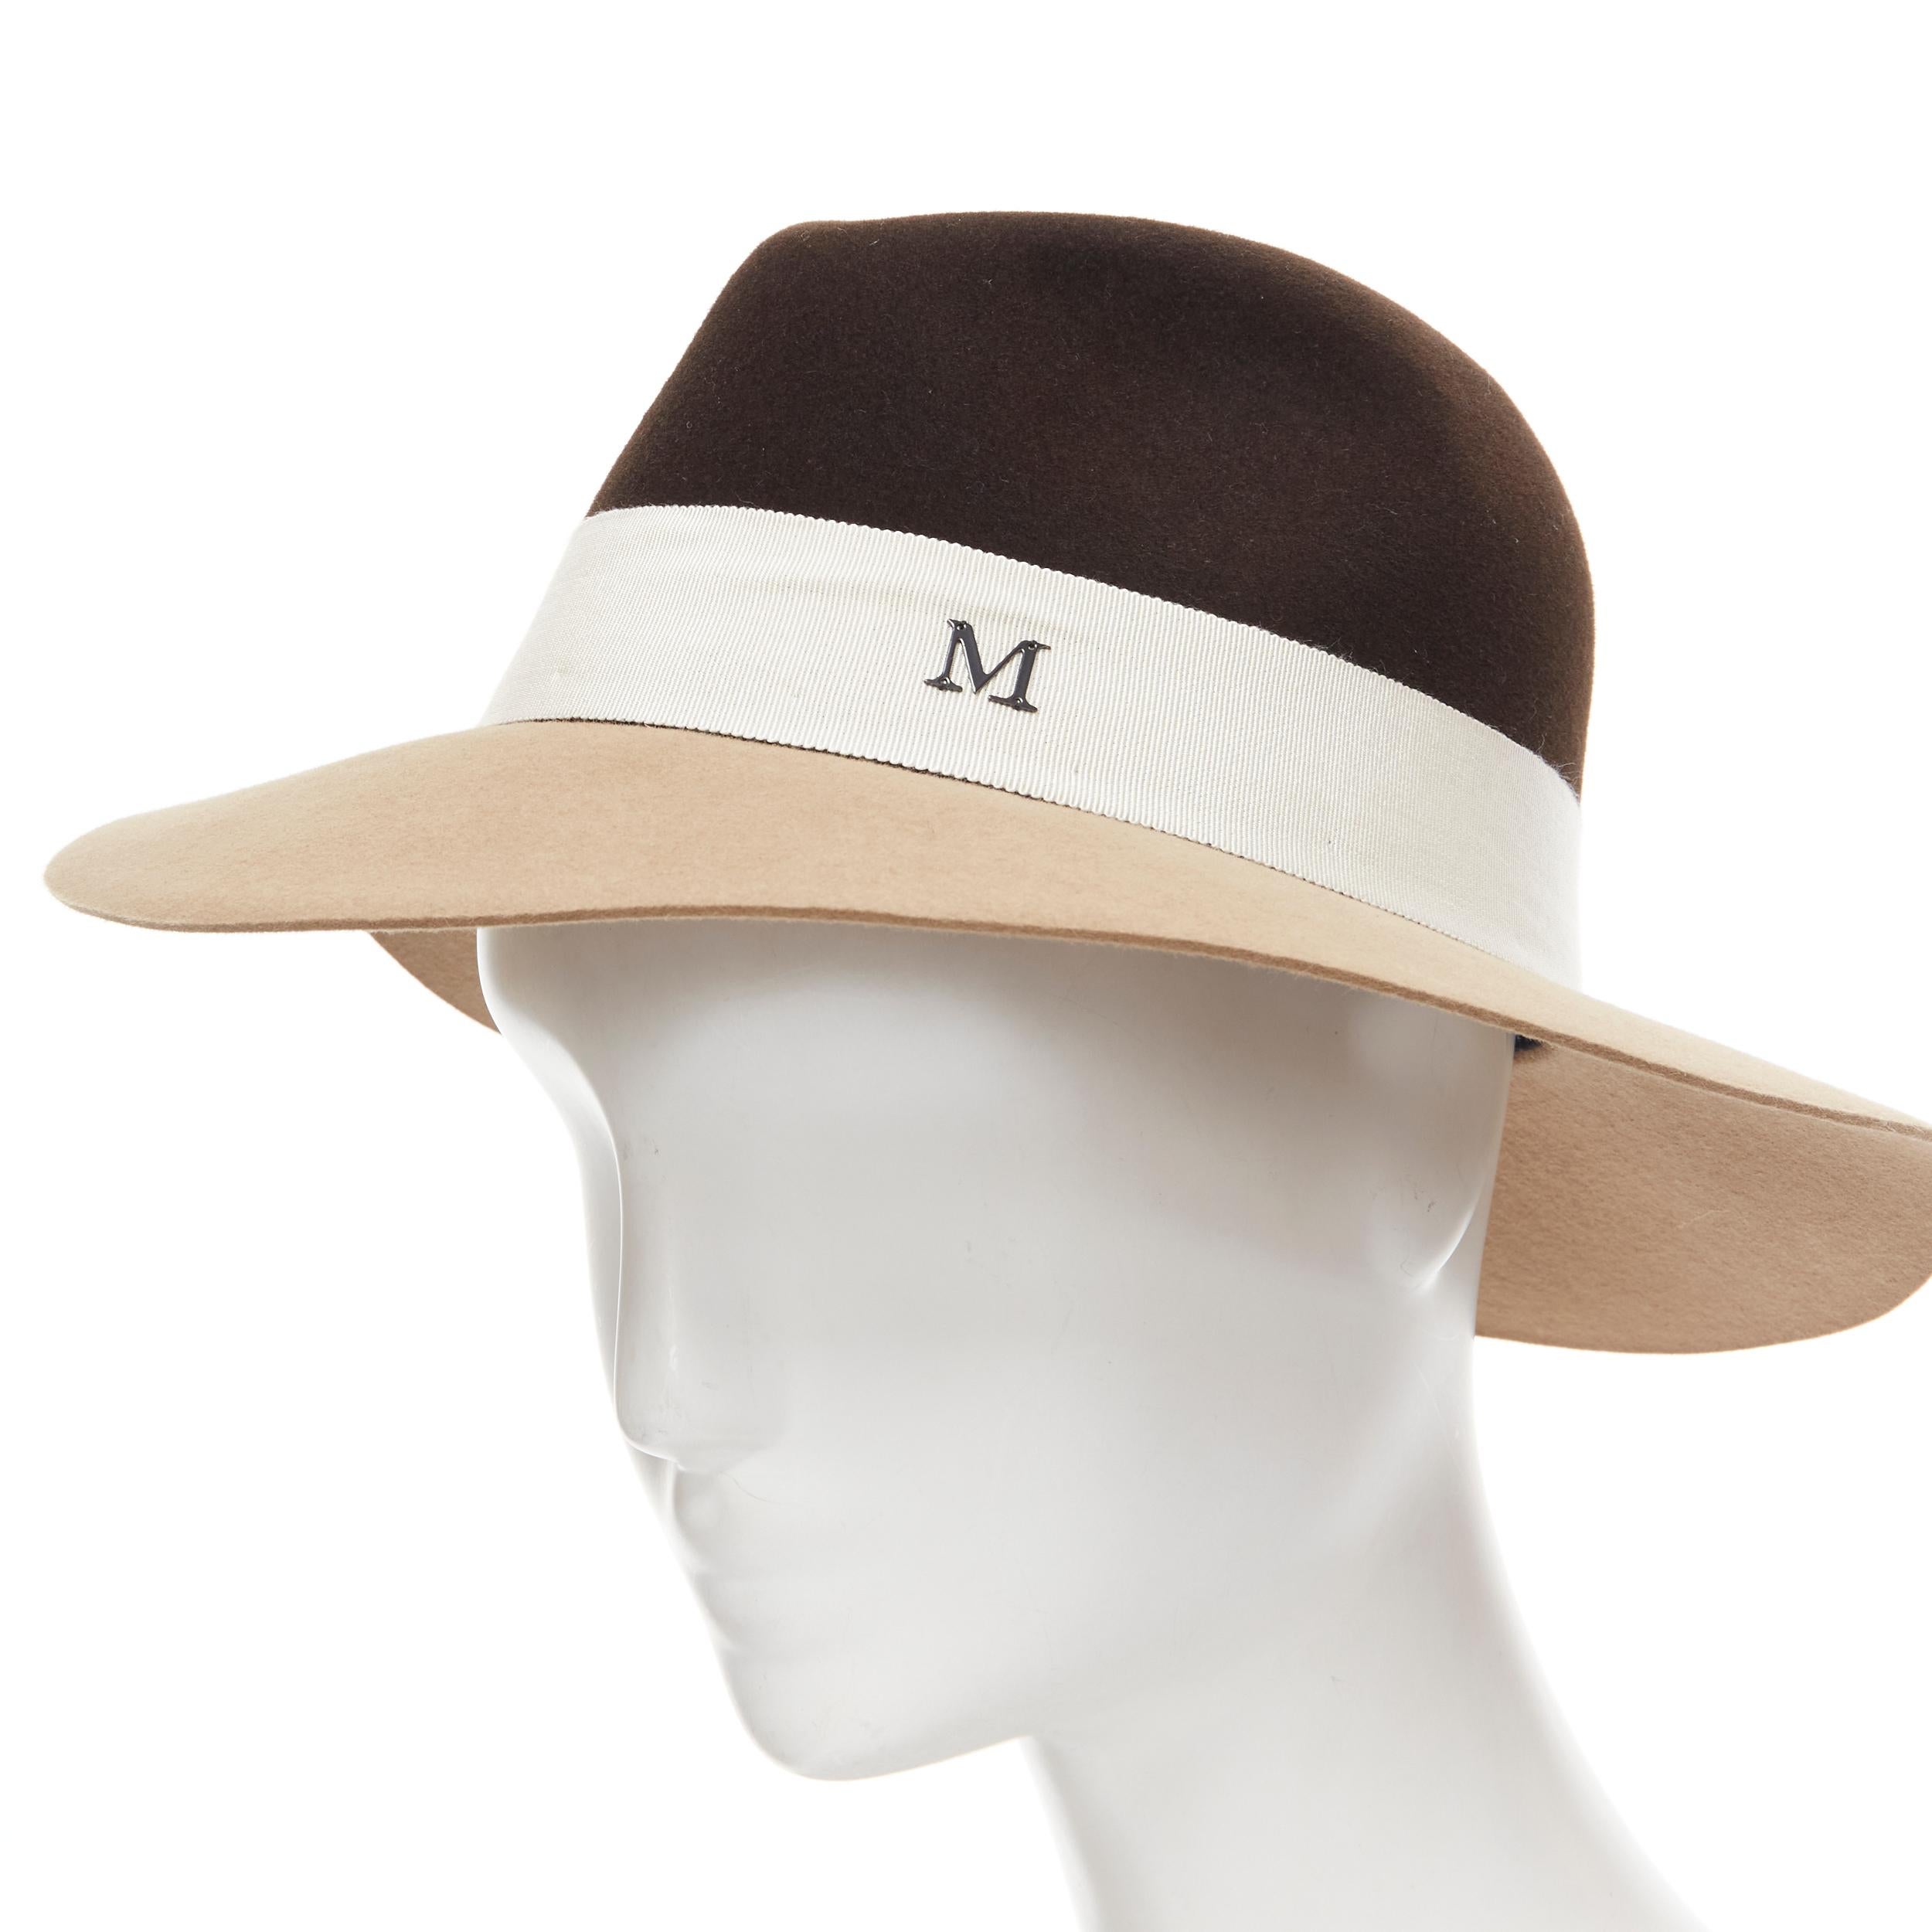 MAISON MICHEL two tone brown camel white grosgrain M logo fedora hat M 57cm 
Reference: MELK/A00158 
Brand: Maison Michel 
Material: Wool 
Color: Brown 
Pattern: Solid 
Closure: Logo 

CONDITION: 
Condition: New without tags. 

SIZING: 
Designer